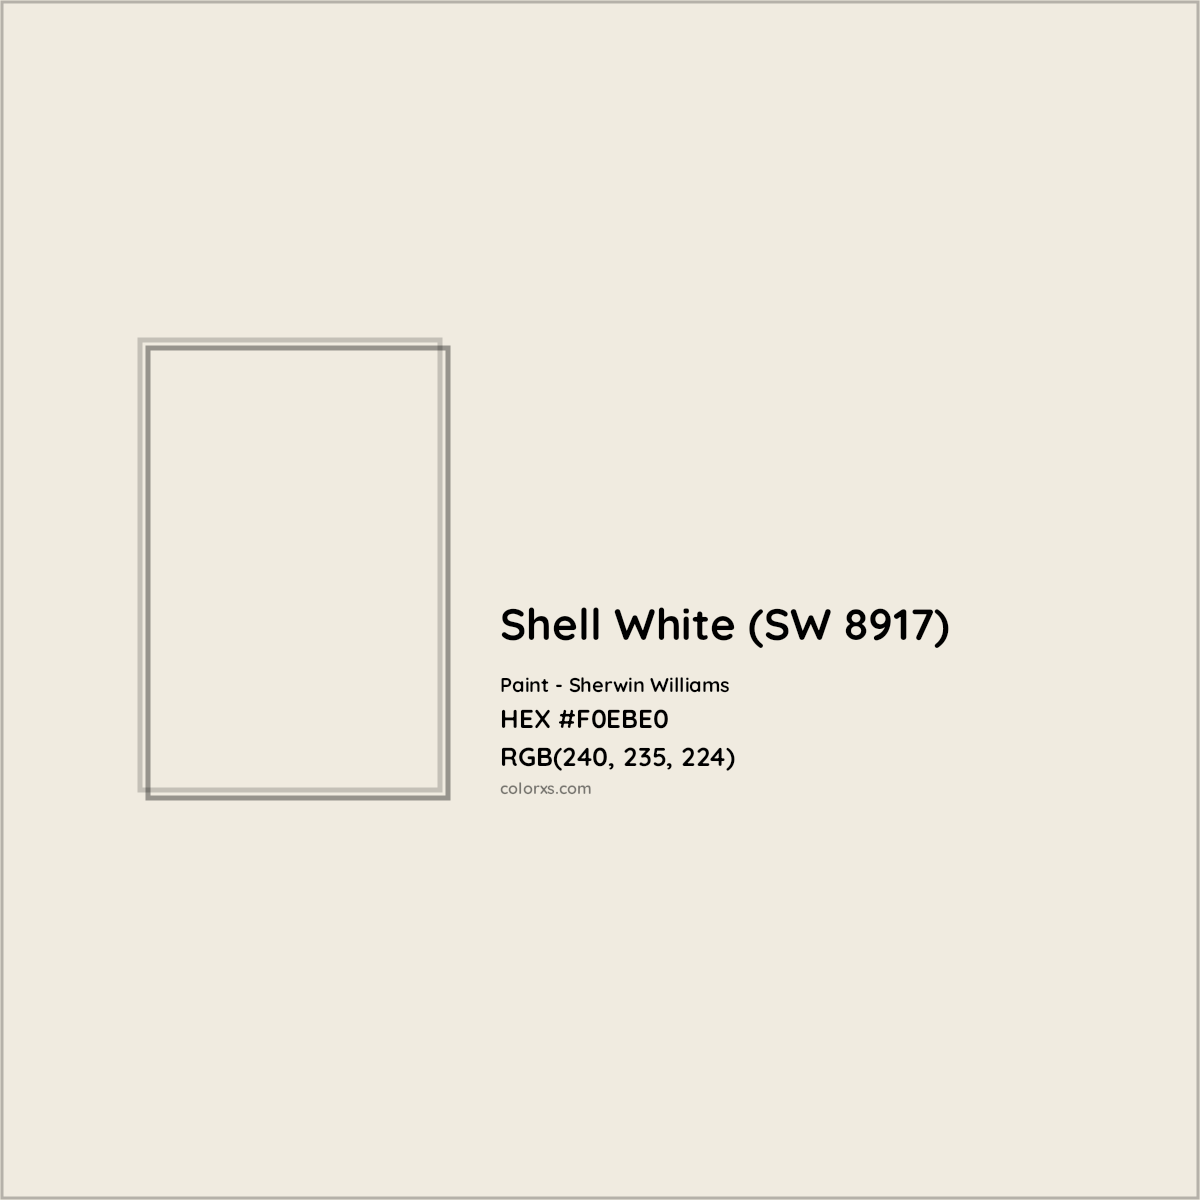 HEX #F0EBE0 Shell White (SW 8917) Paint Sherwin Williams - Color Code